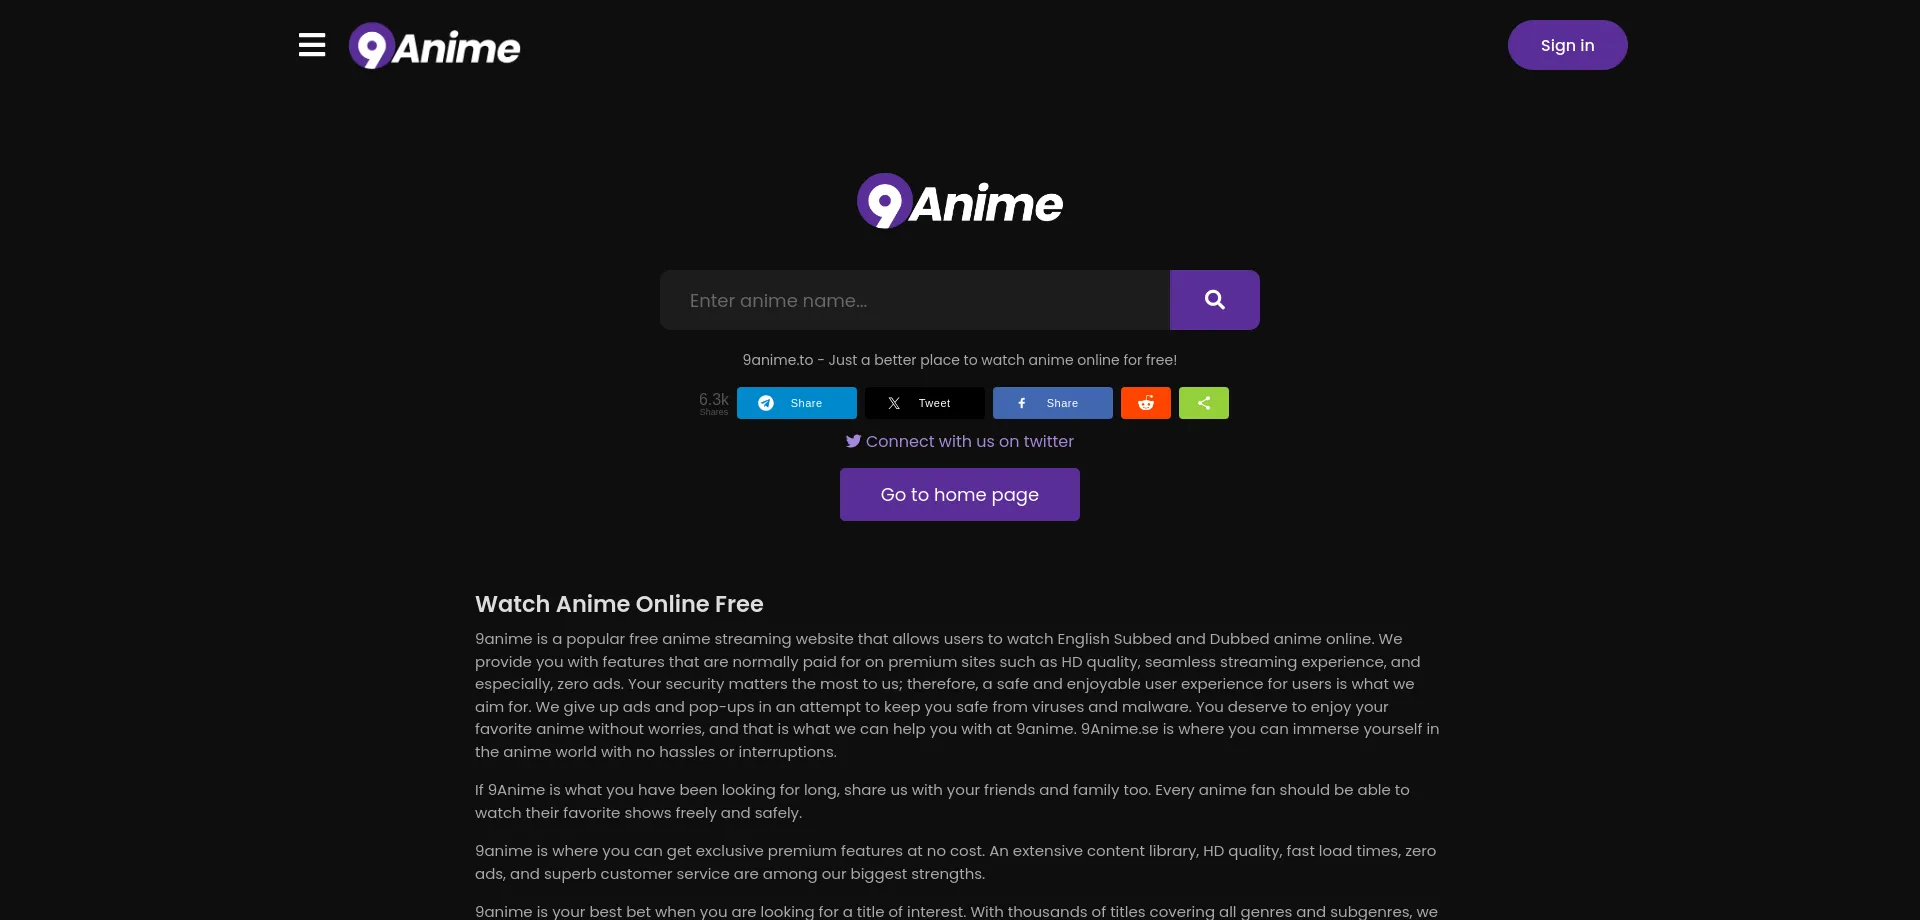 9 Anime Series To Watch For Free on YouTube